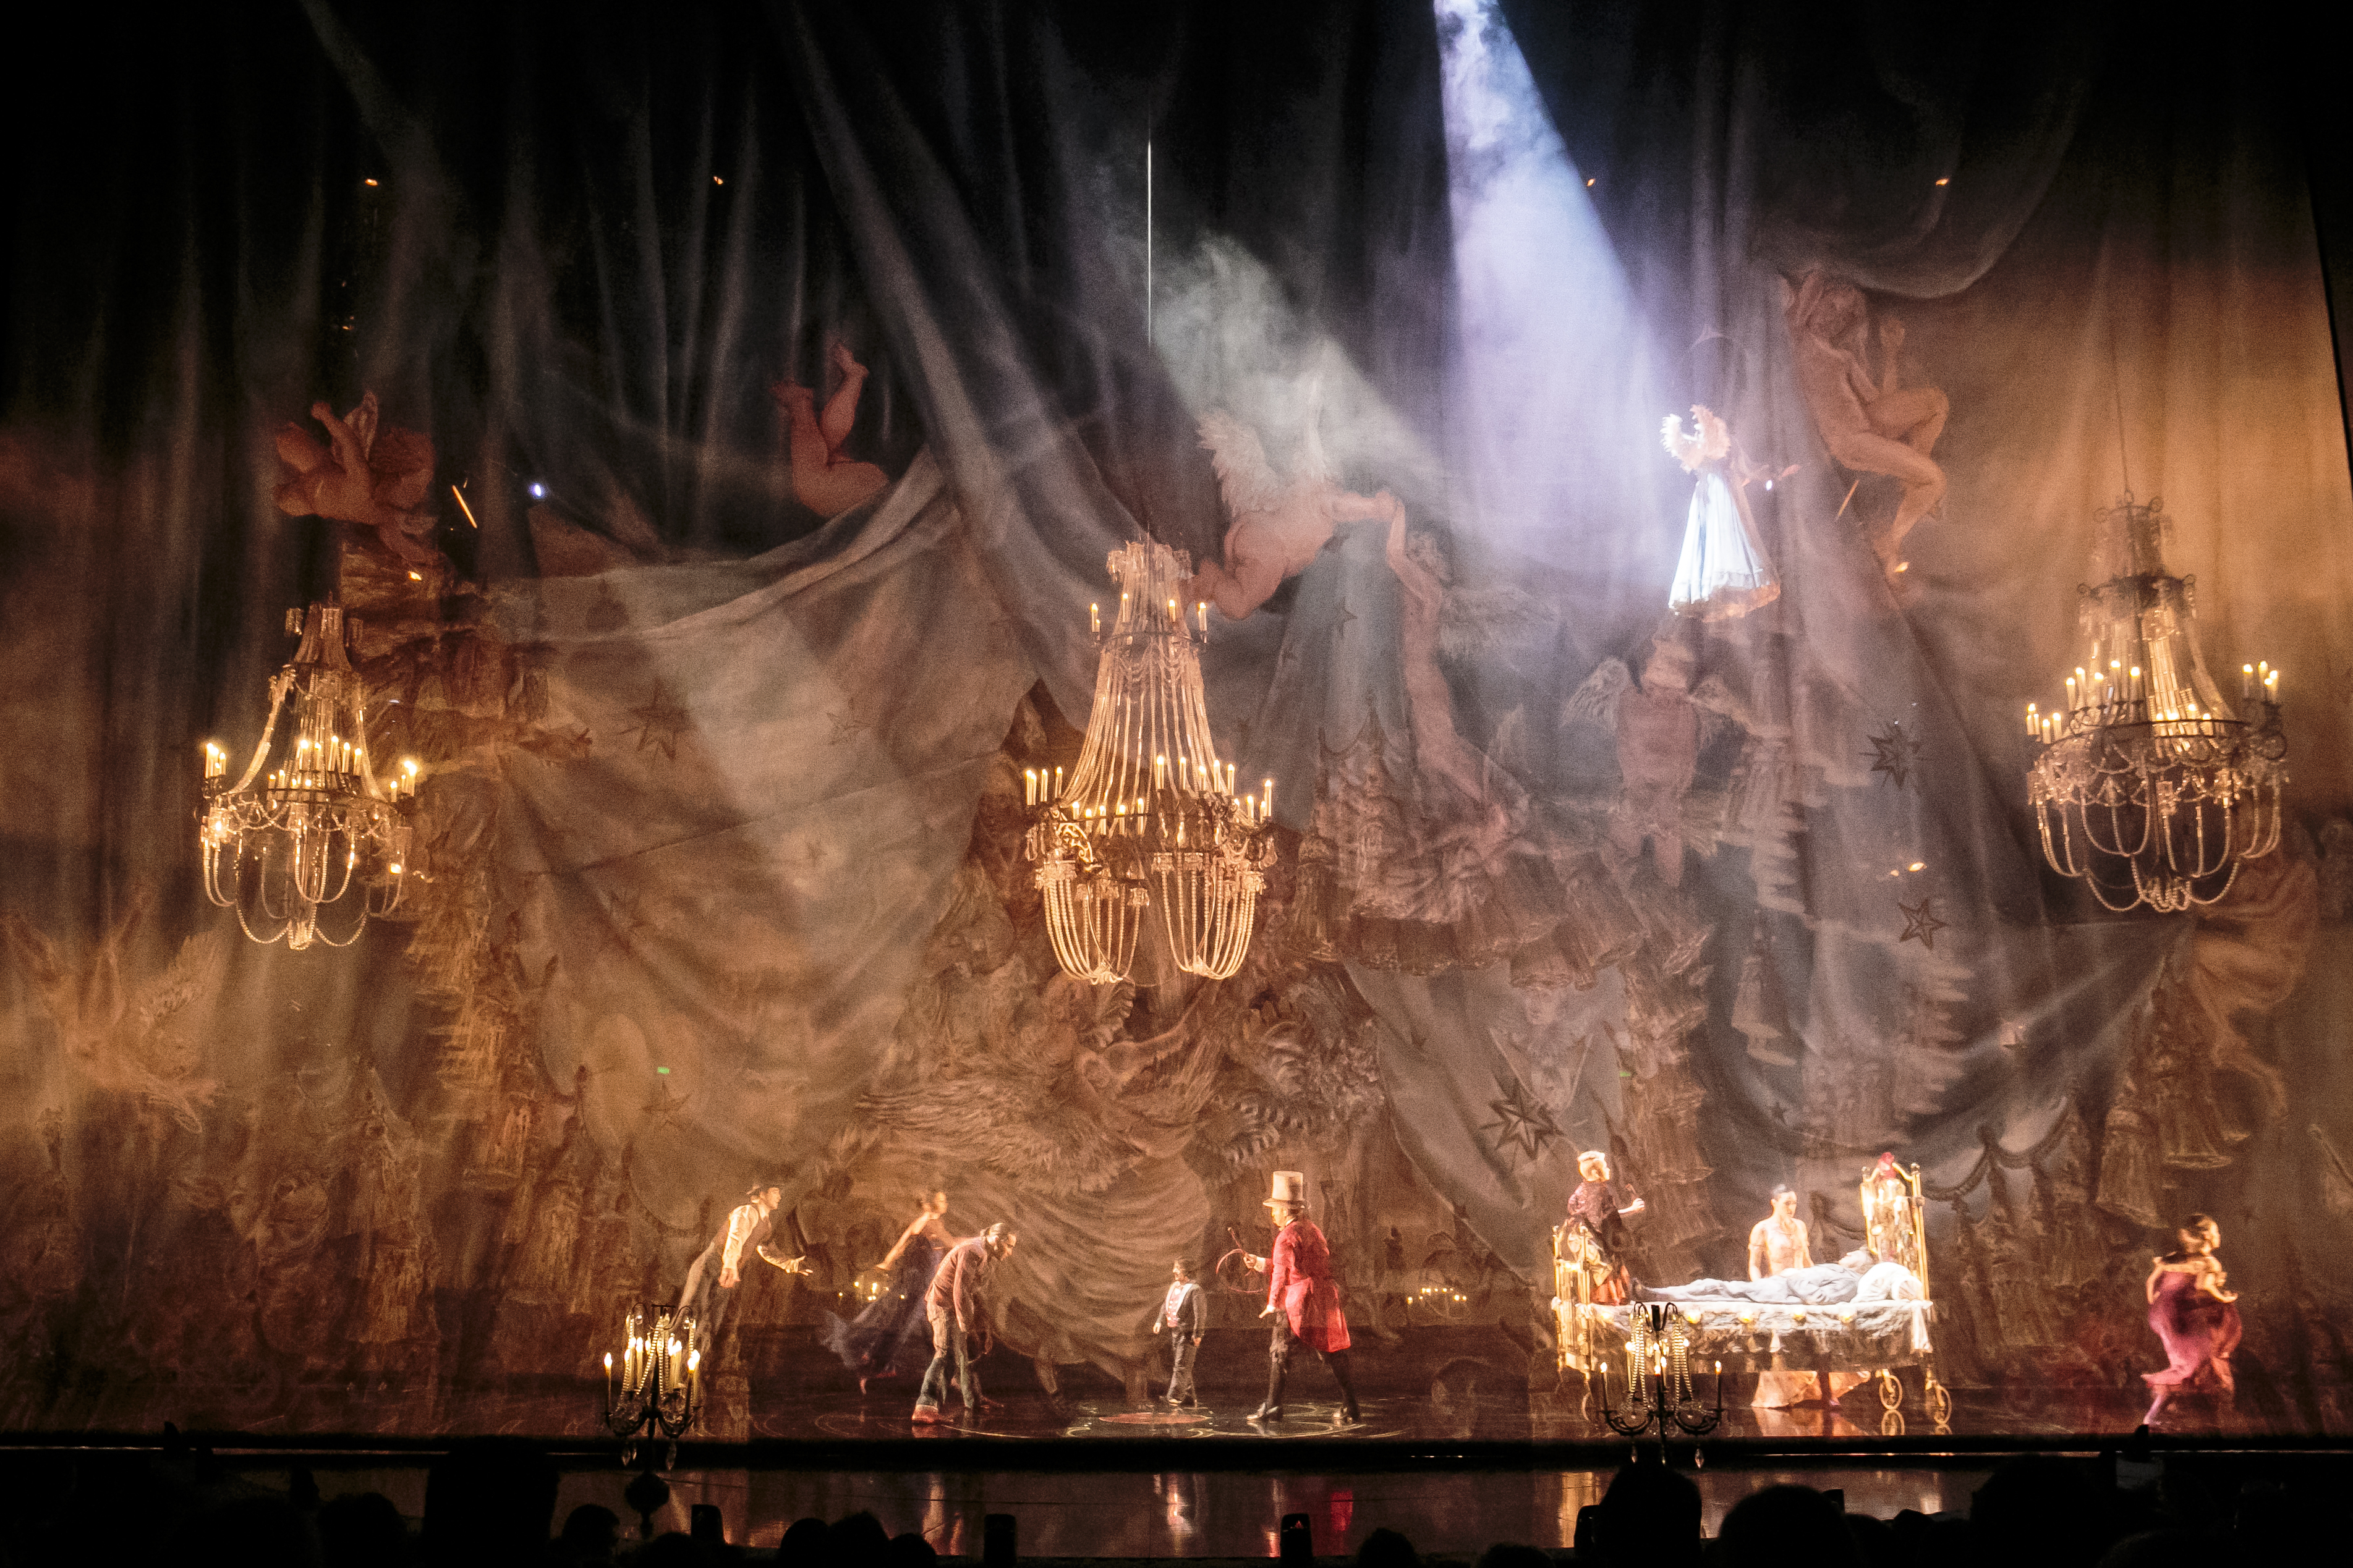 The opening of Corteo. Photo courtesy of Cirque du Soleil, as is the one at the top of the page.